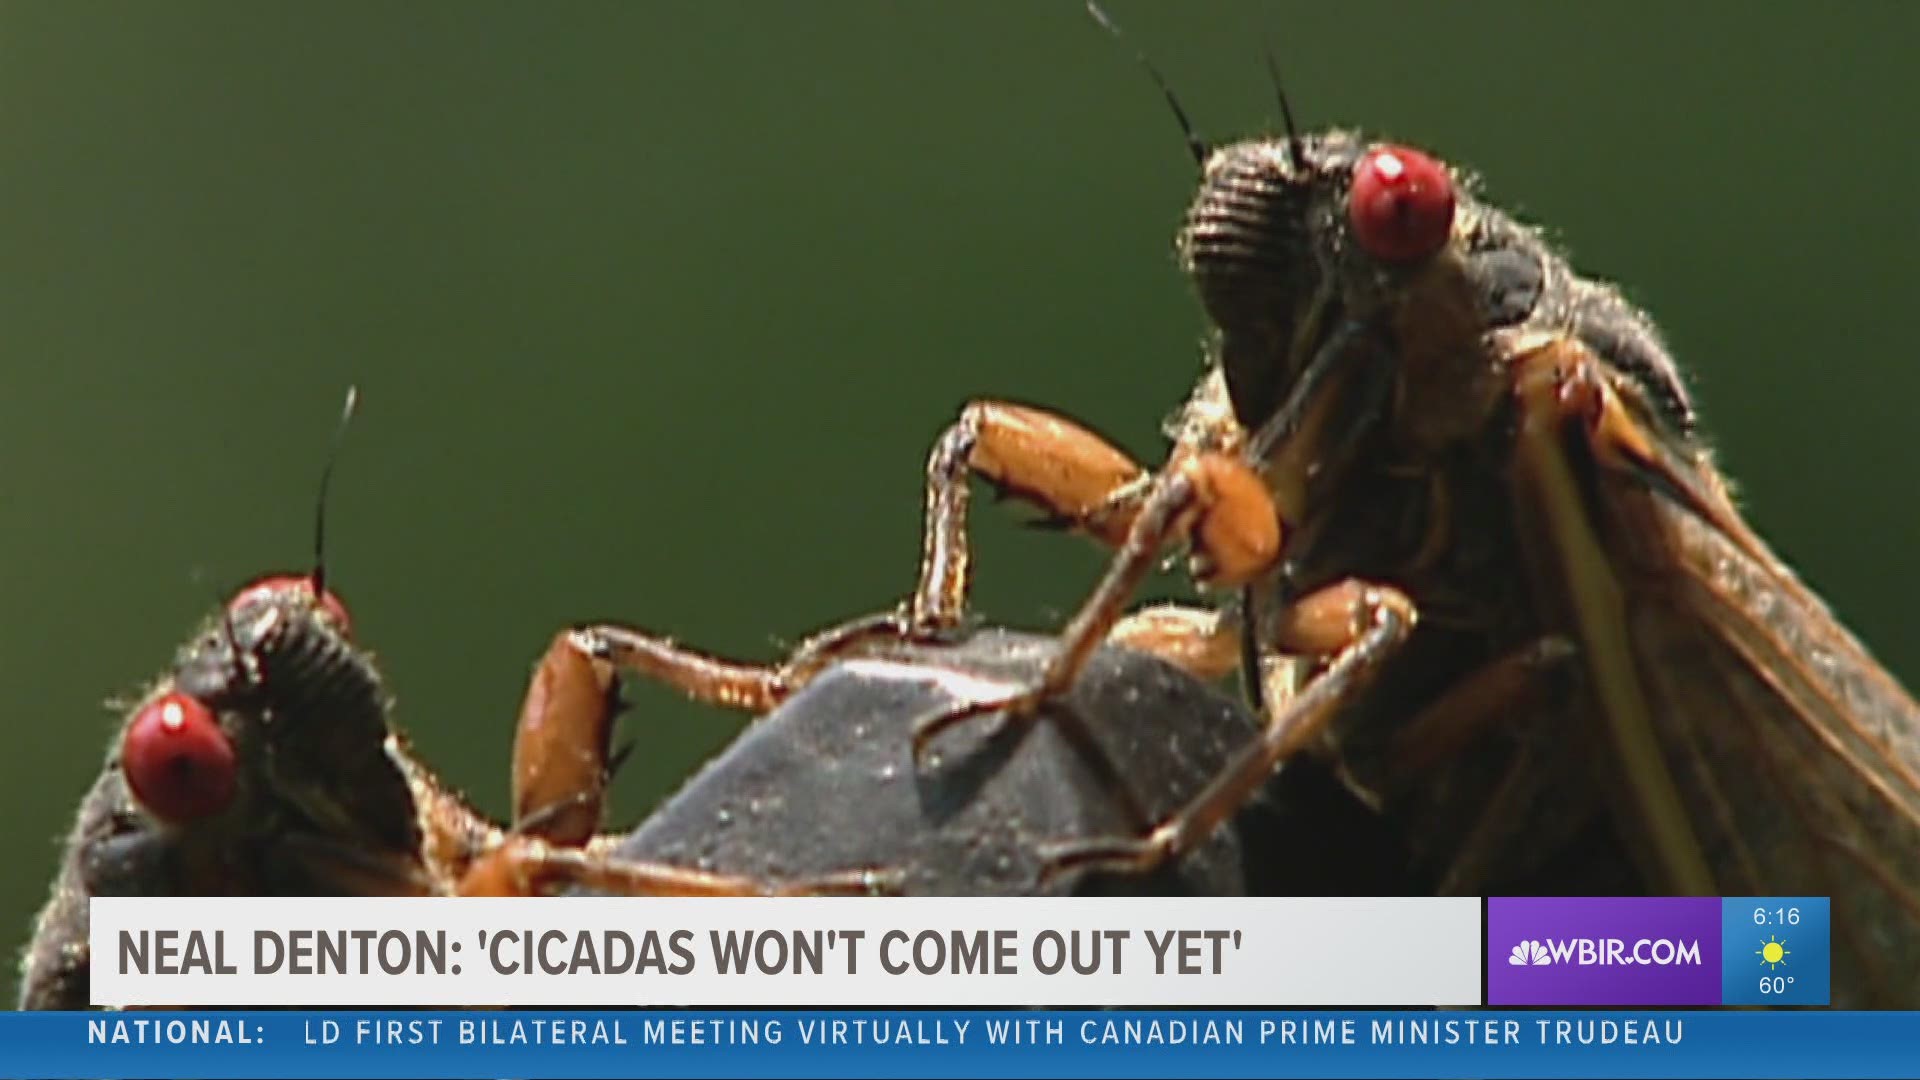 Neal Denton with UT Extension says cicadas don't actually come out when the air gets warm, but when the soil warms up.